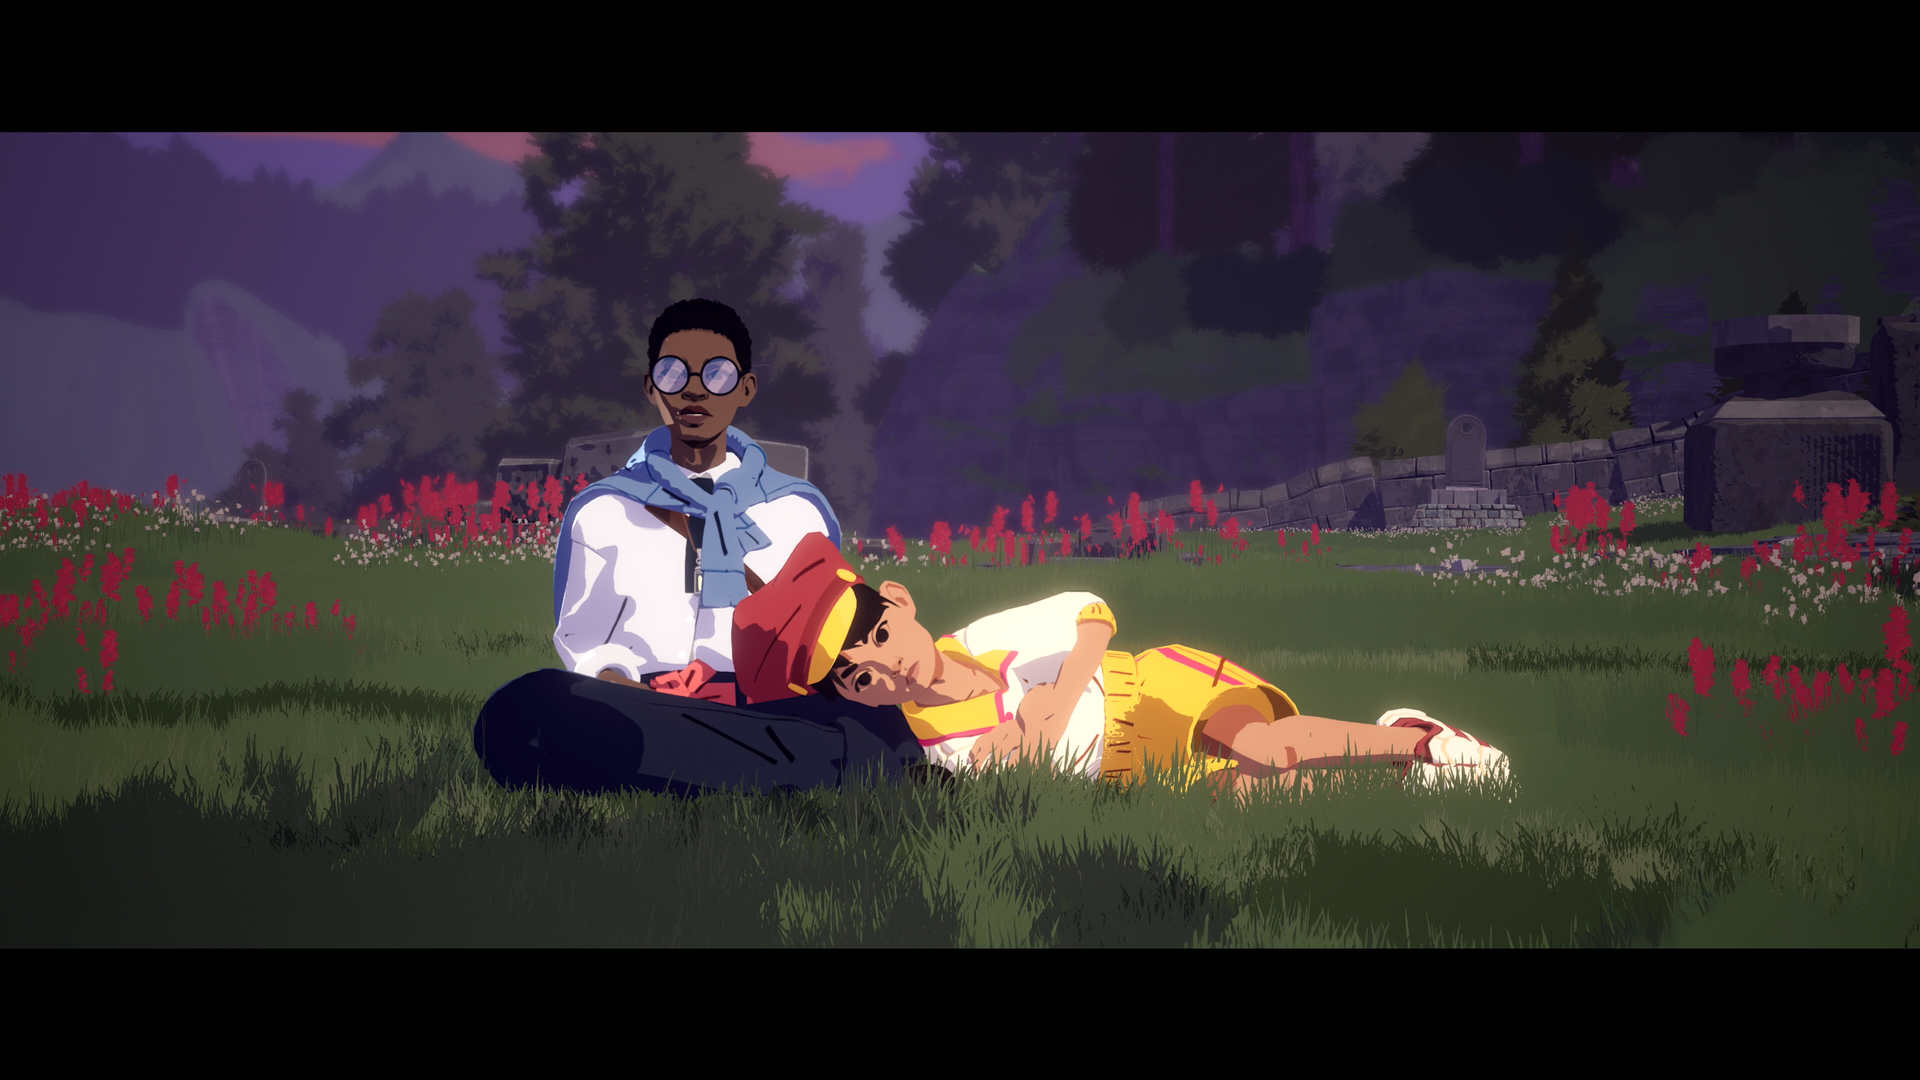 A young boy lays with his head in a woman's lap amid a field of red flowers.